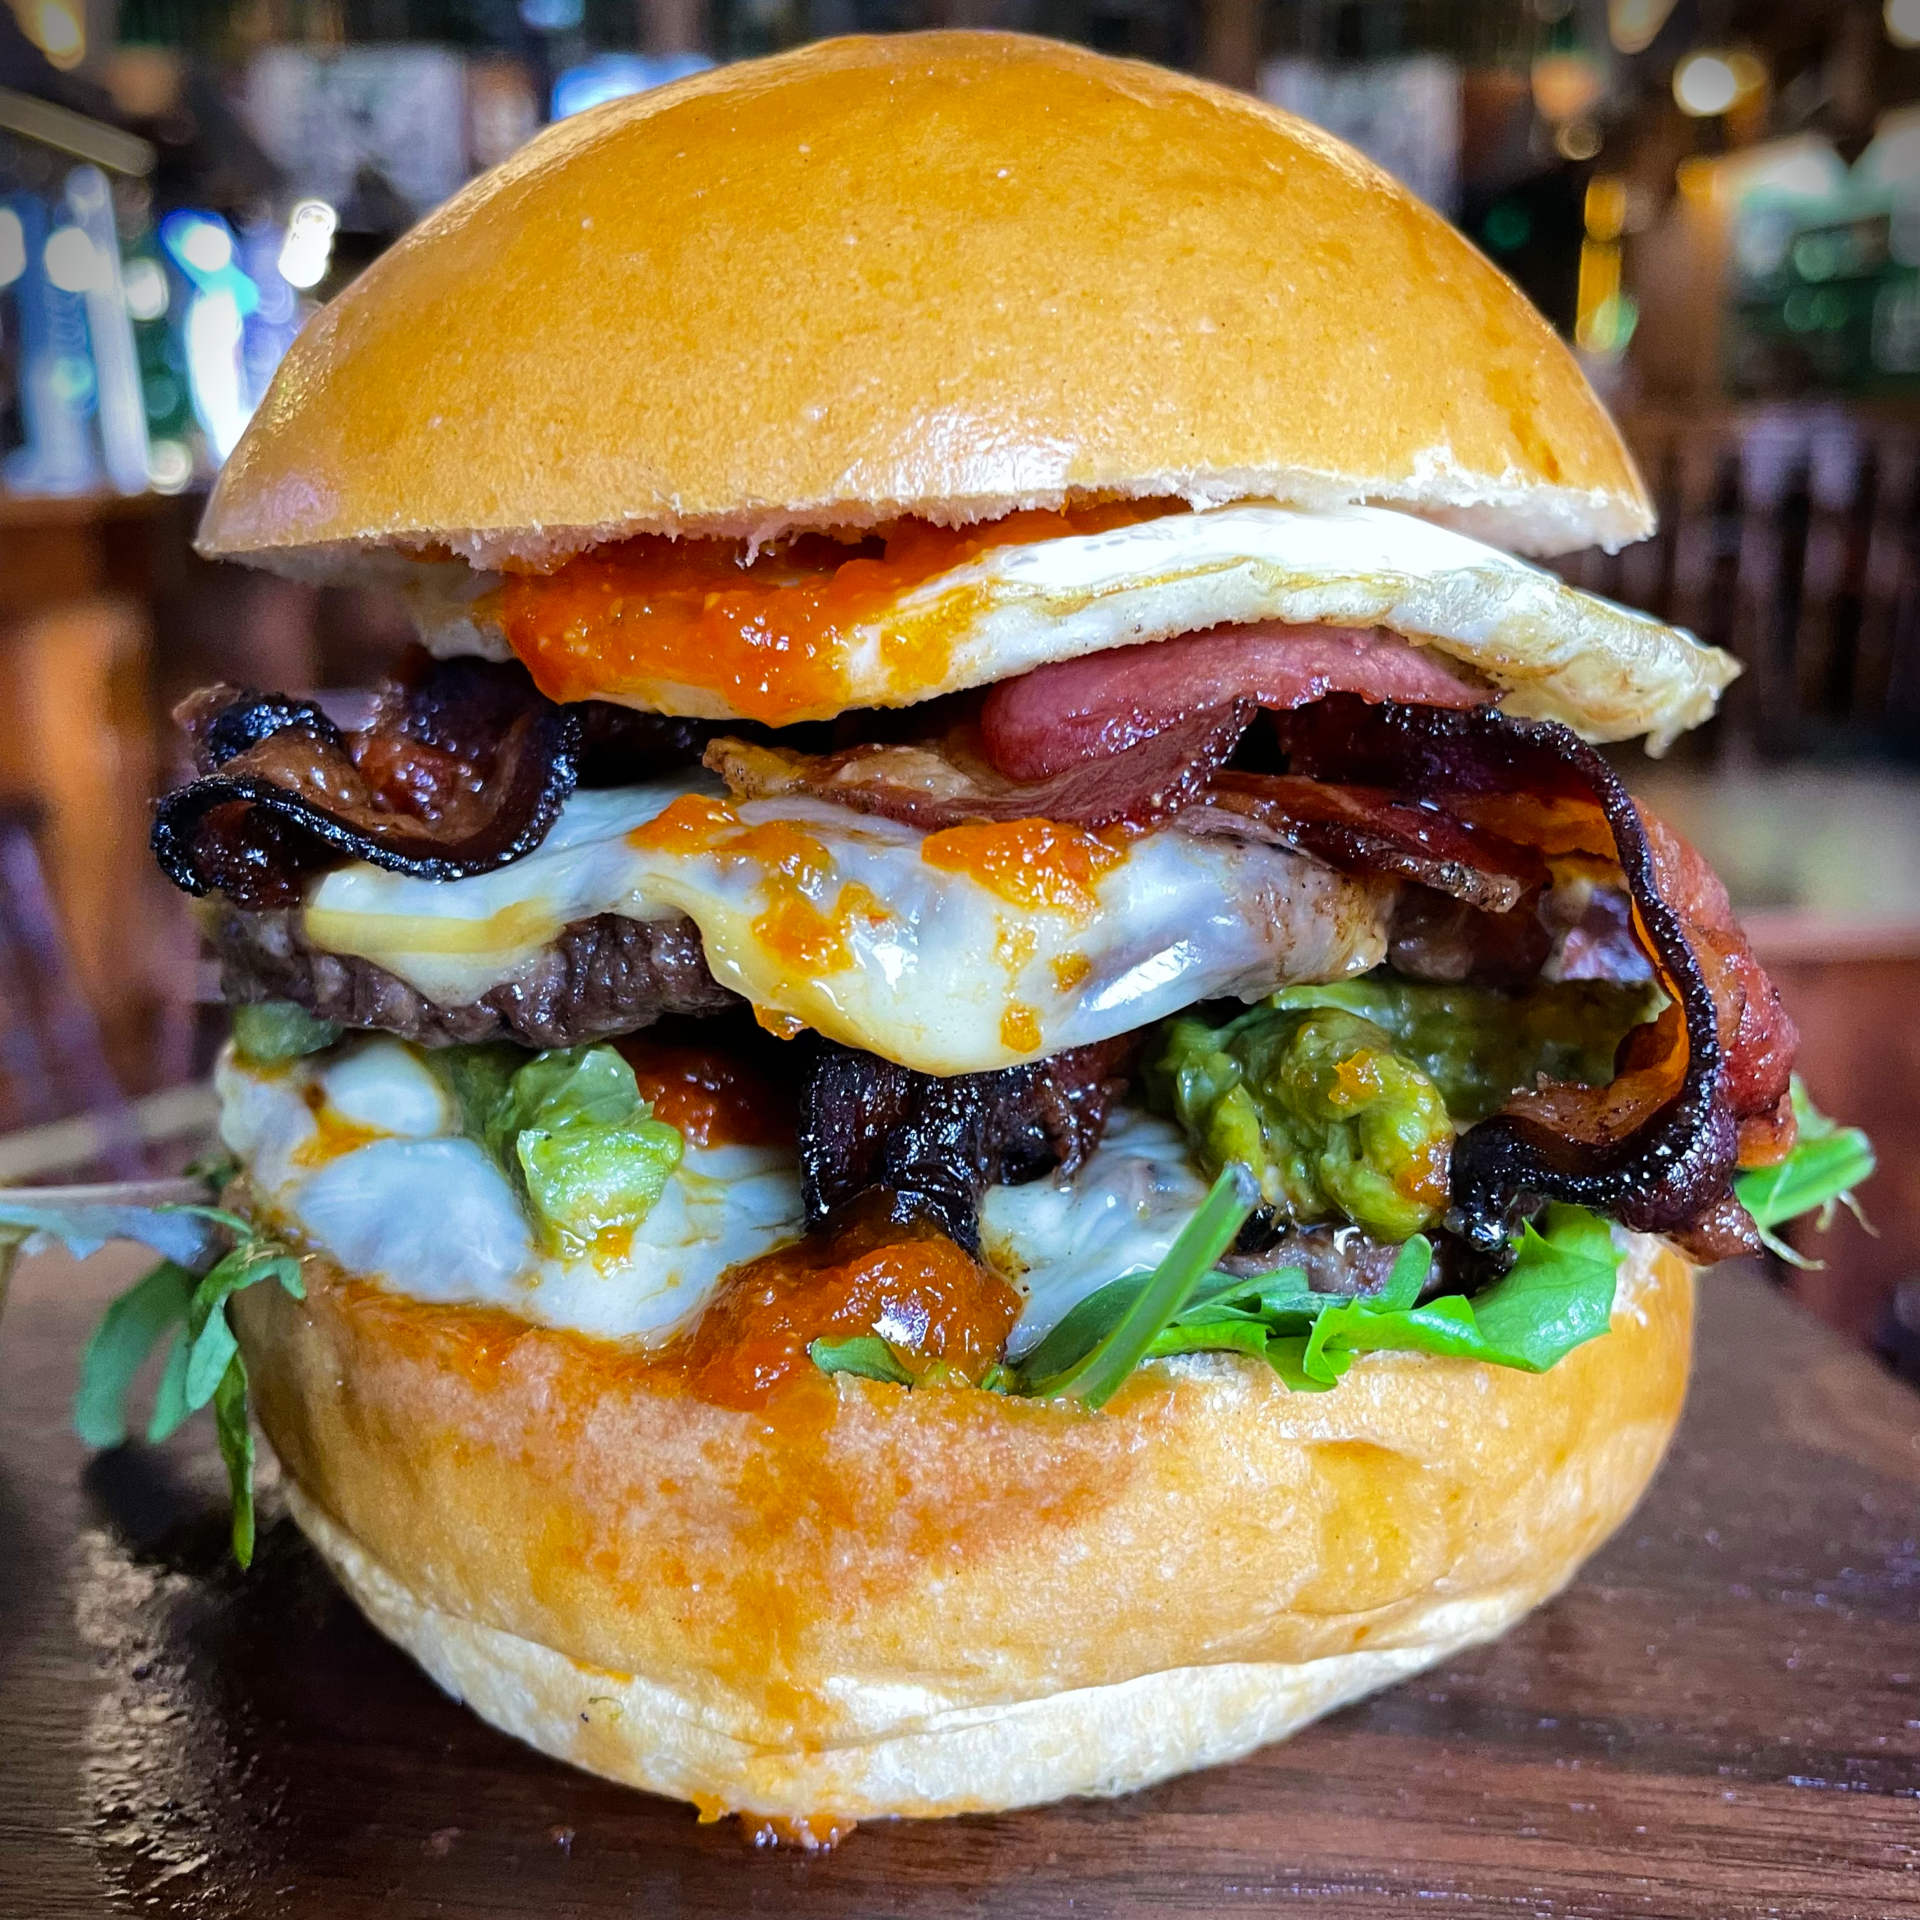 Old Square - Daily Burger 315